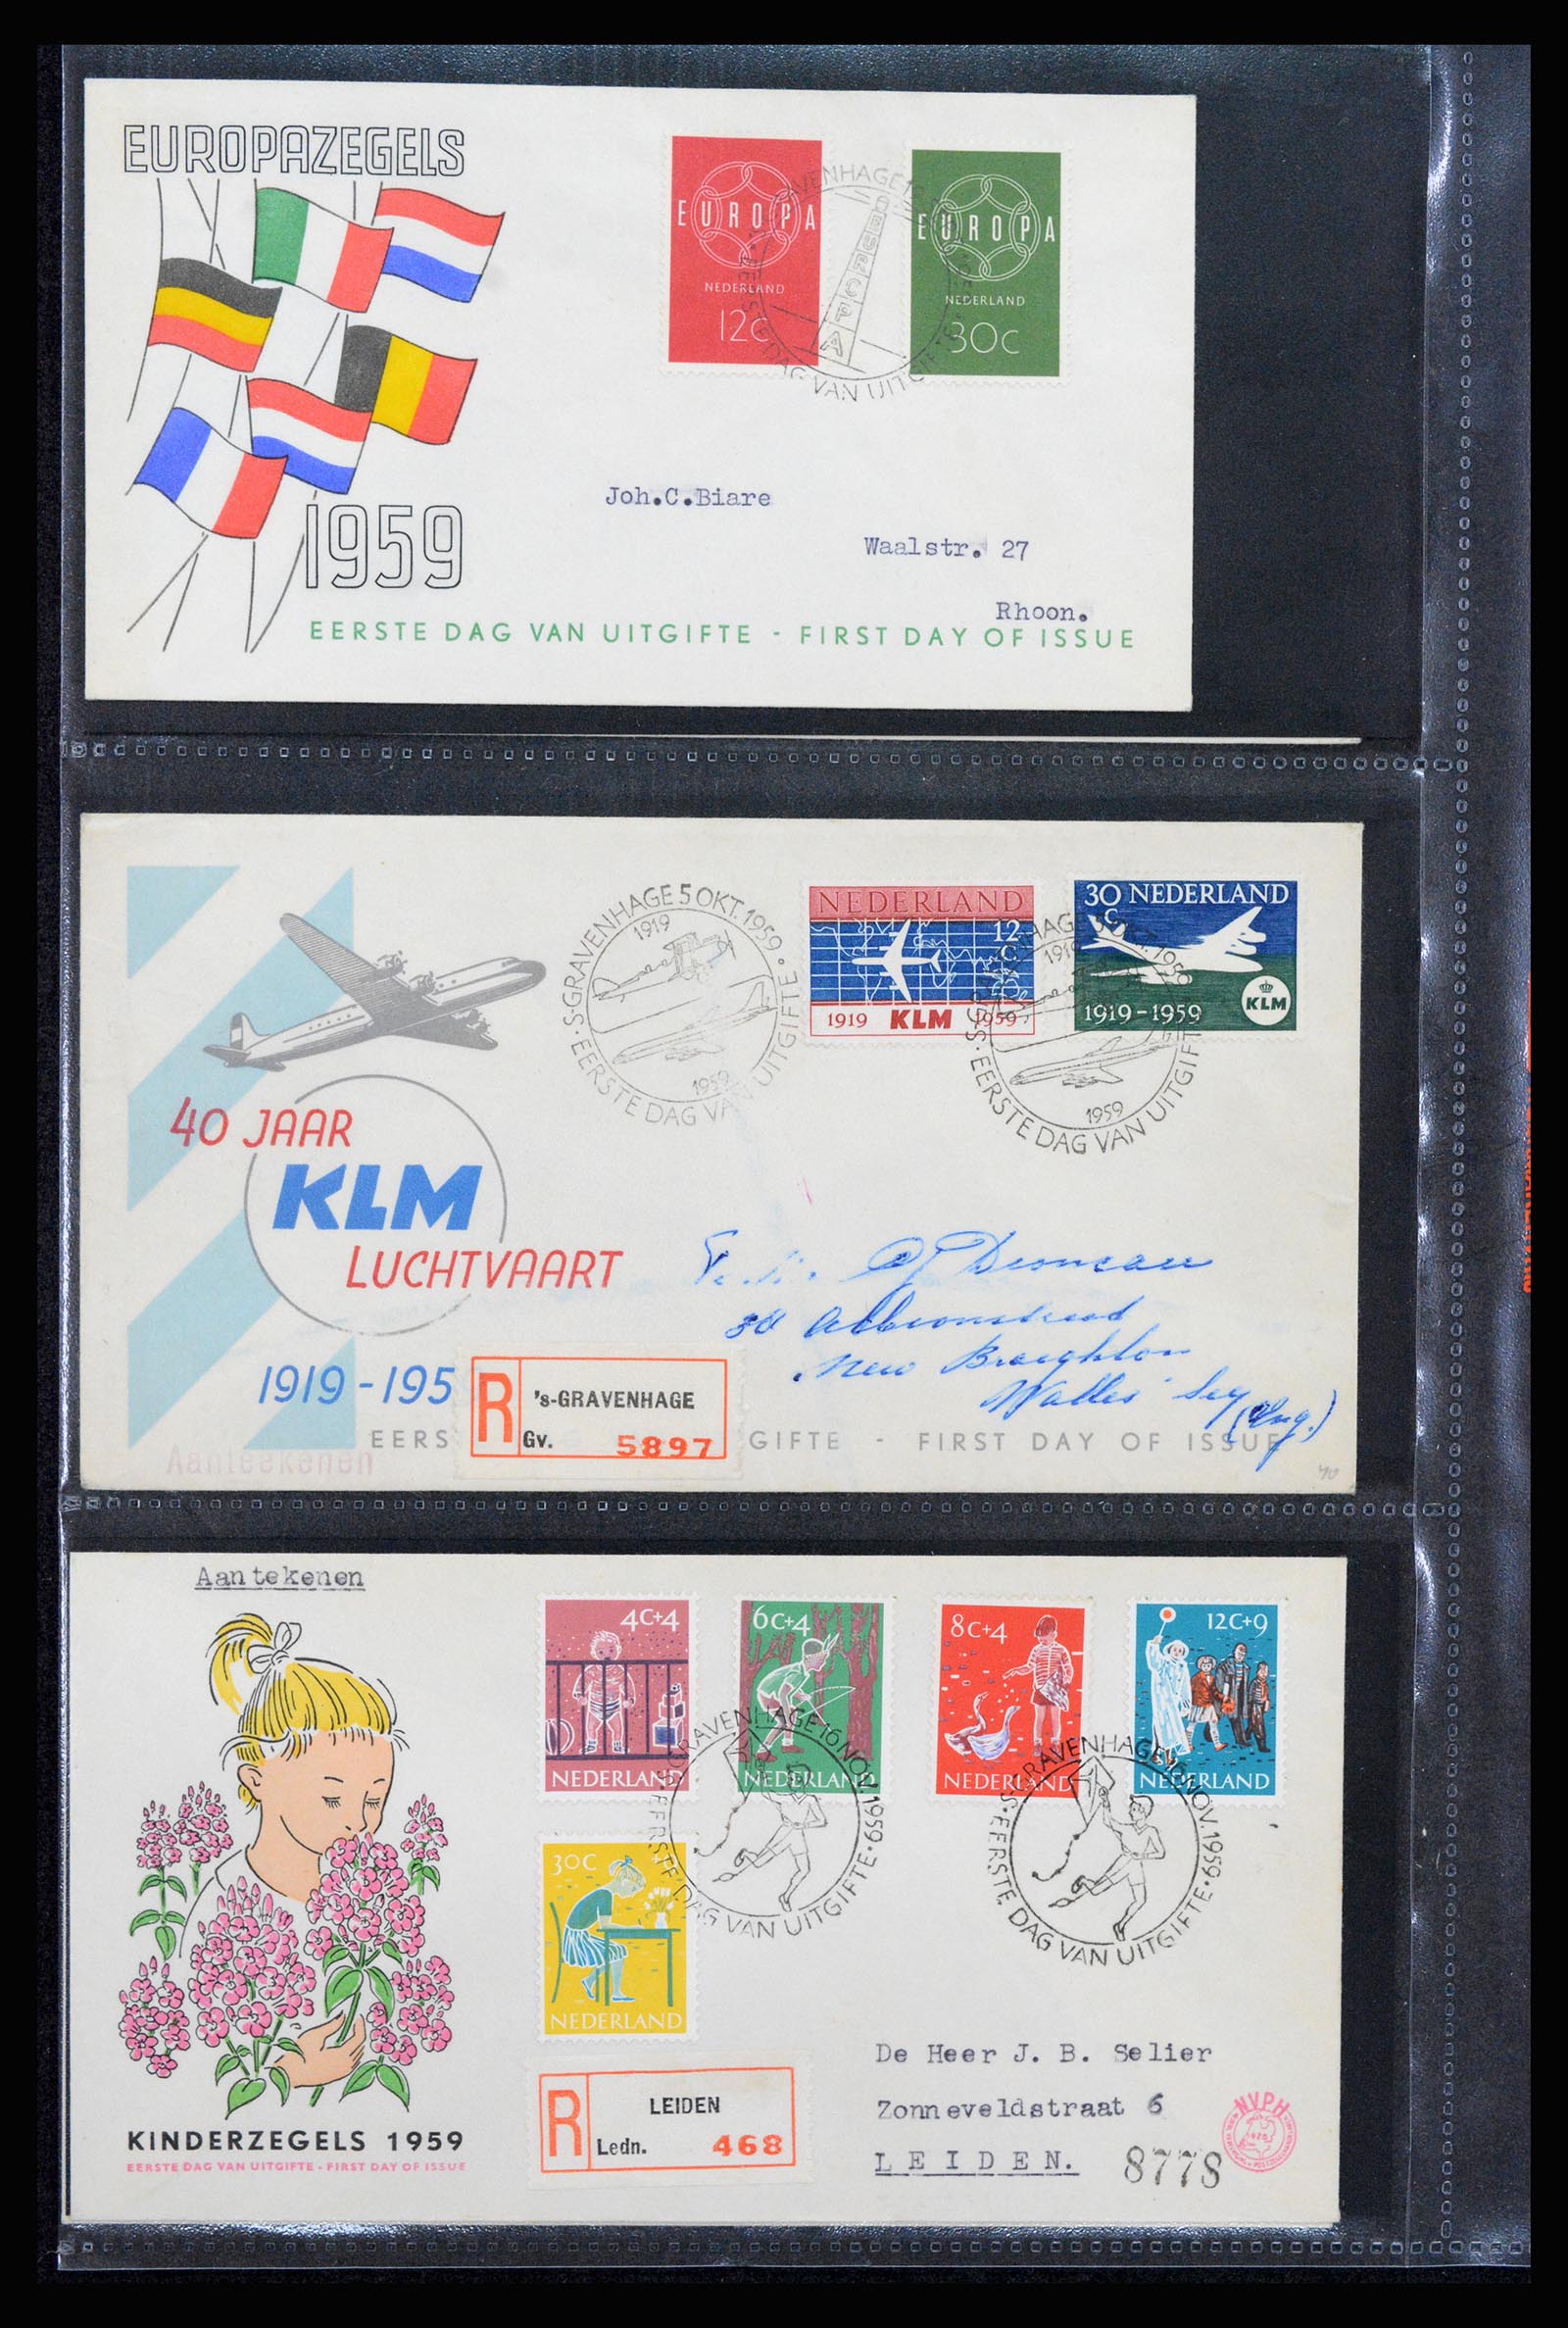 37264 014 - Stamp collection 37264 Netherlands FDC's 1950-1975.